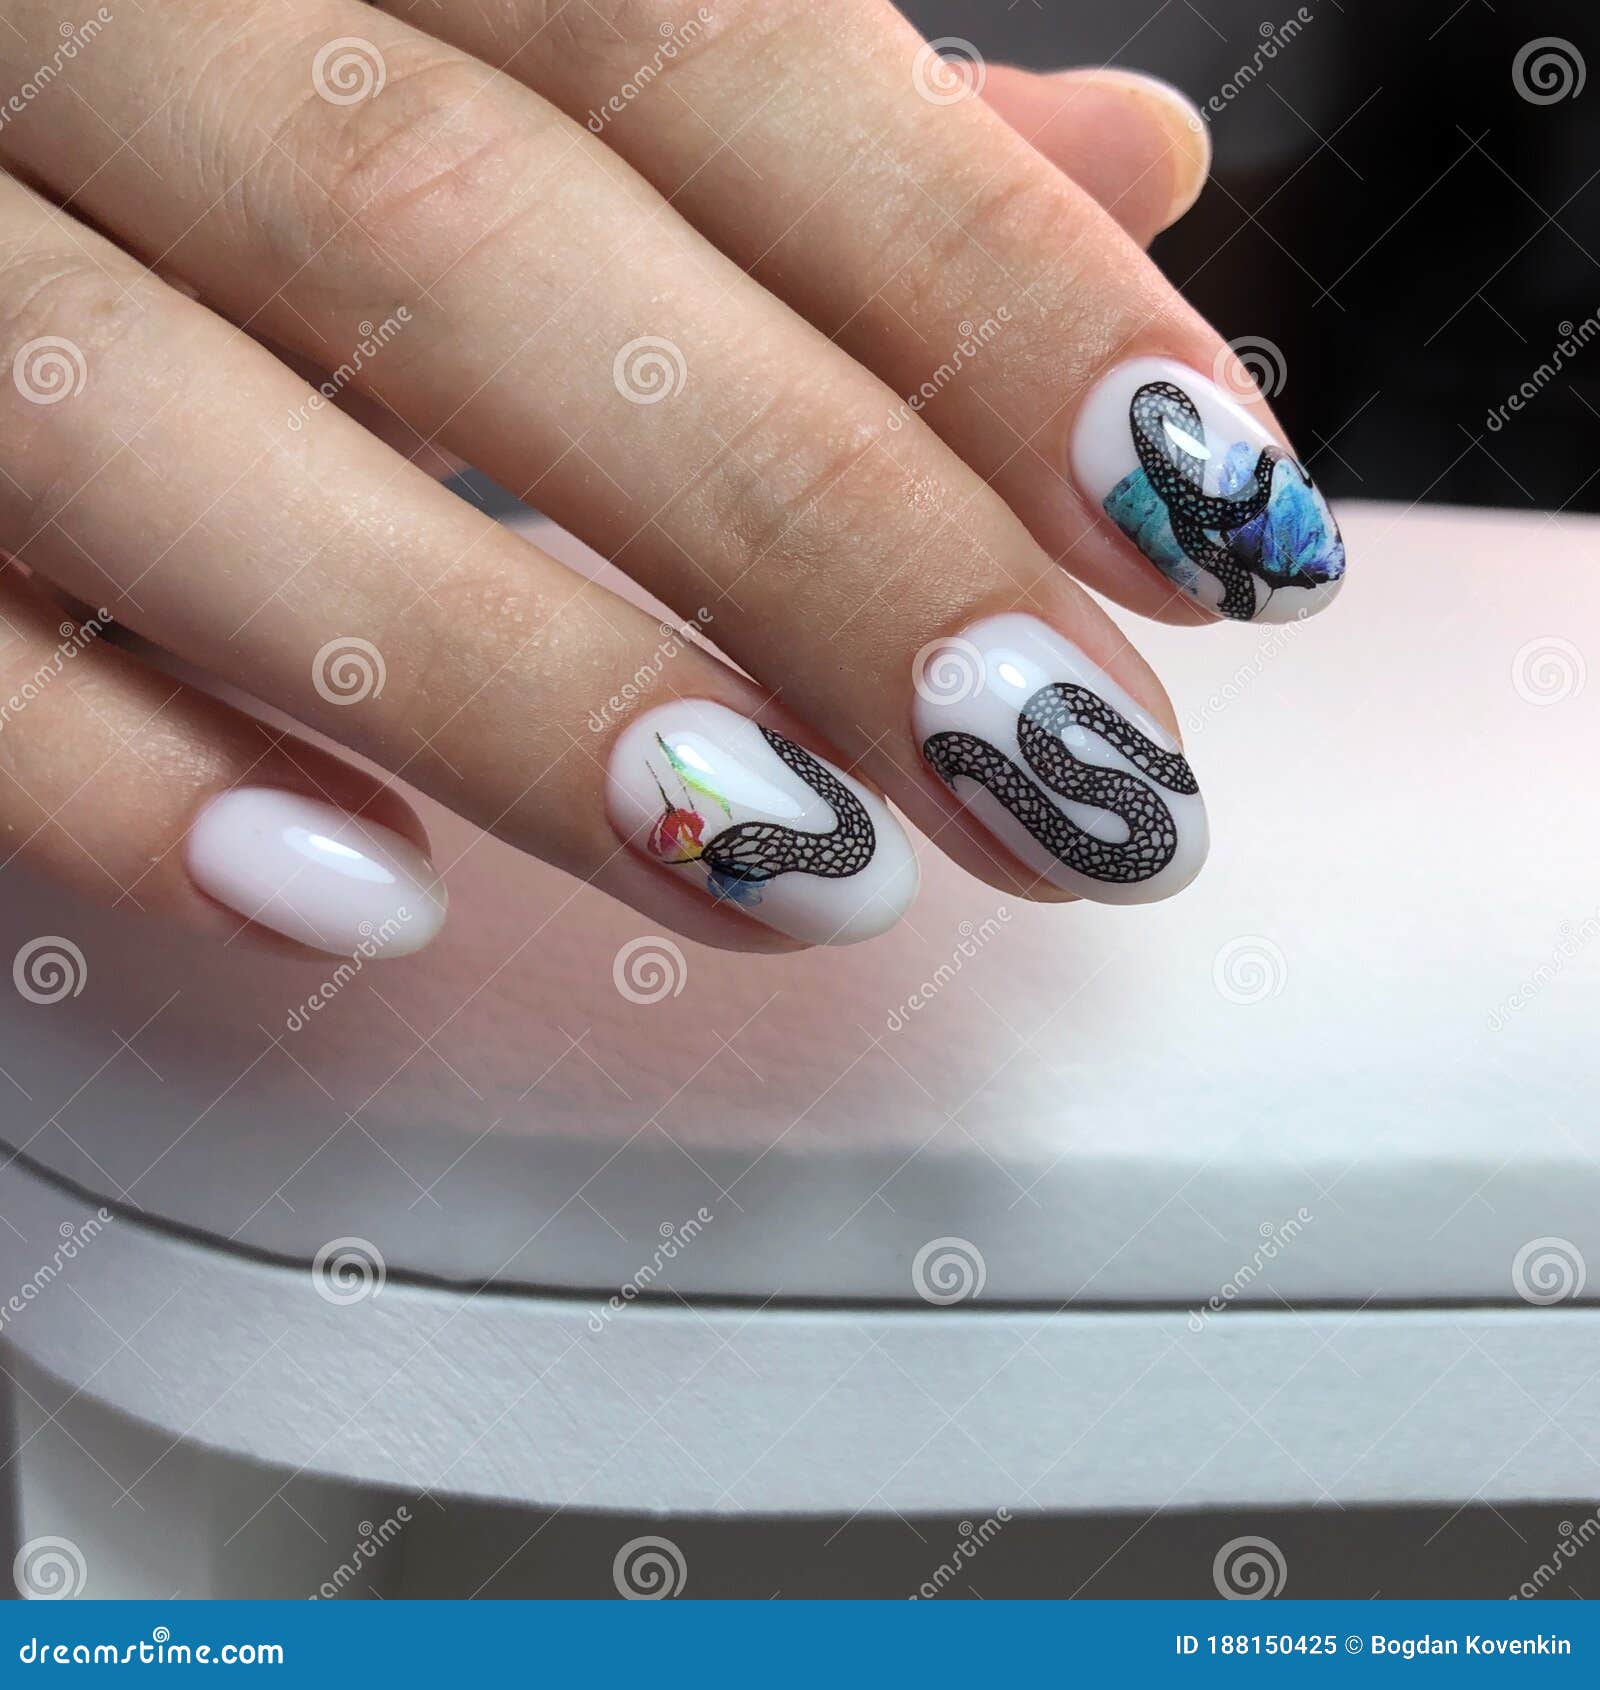 Female Manicure. Manicure with a Snake Design on the Nails Stock Image ...